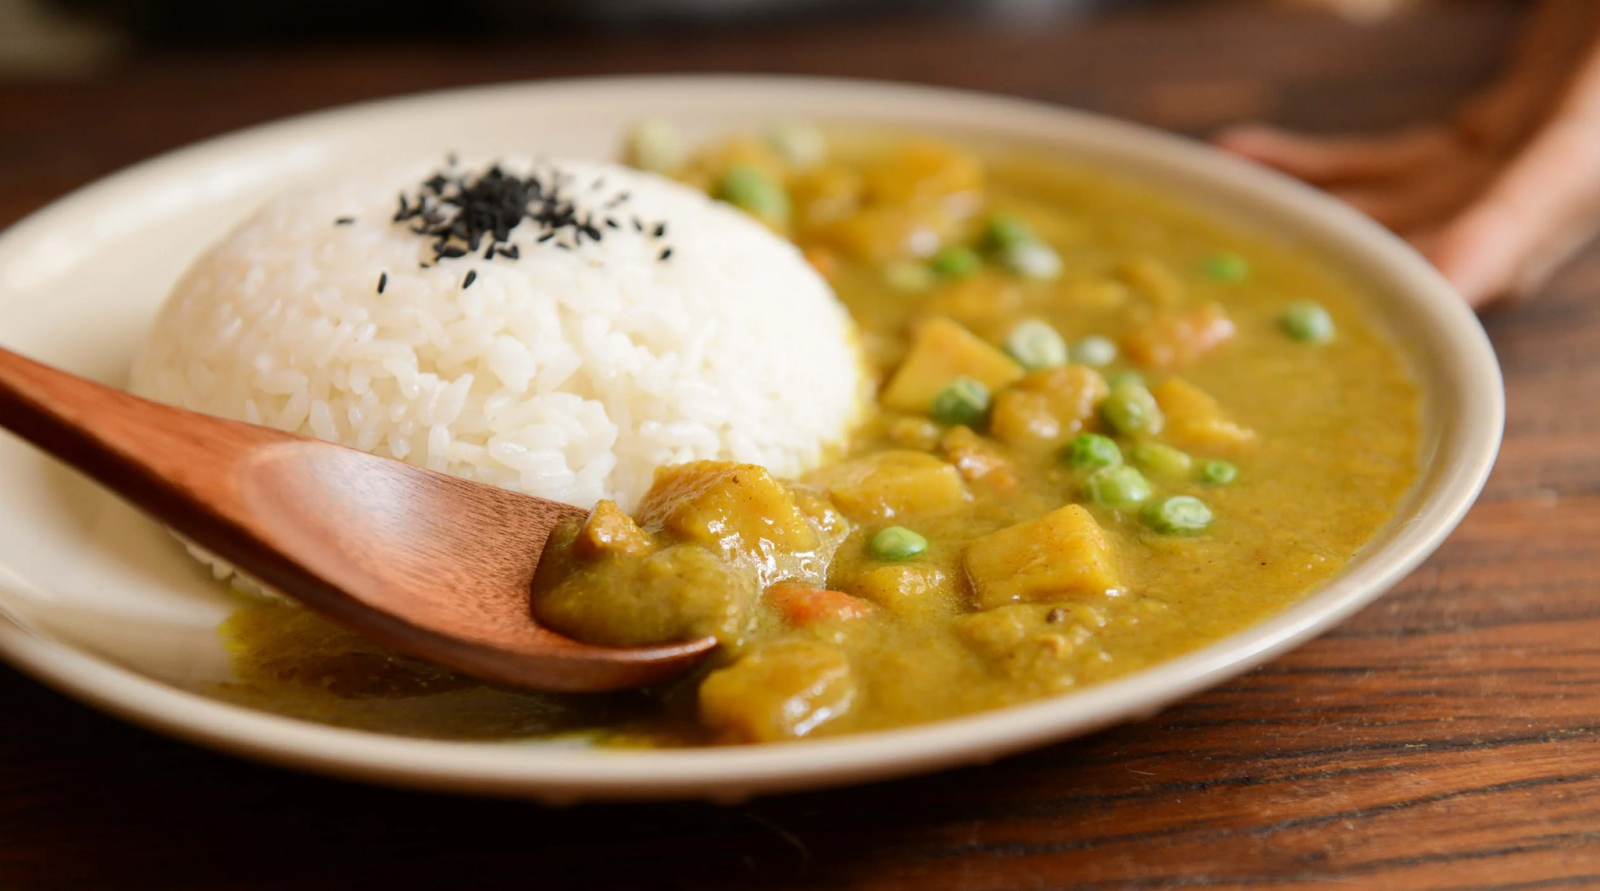  A plate of vegetable curry with a serving of rice and a wooden spoon.